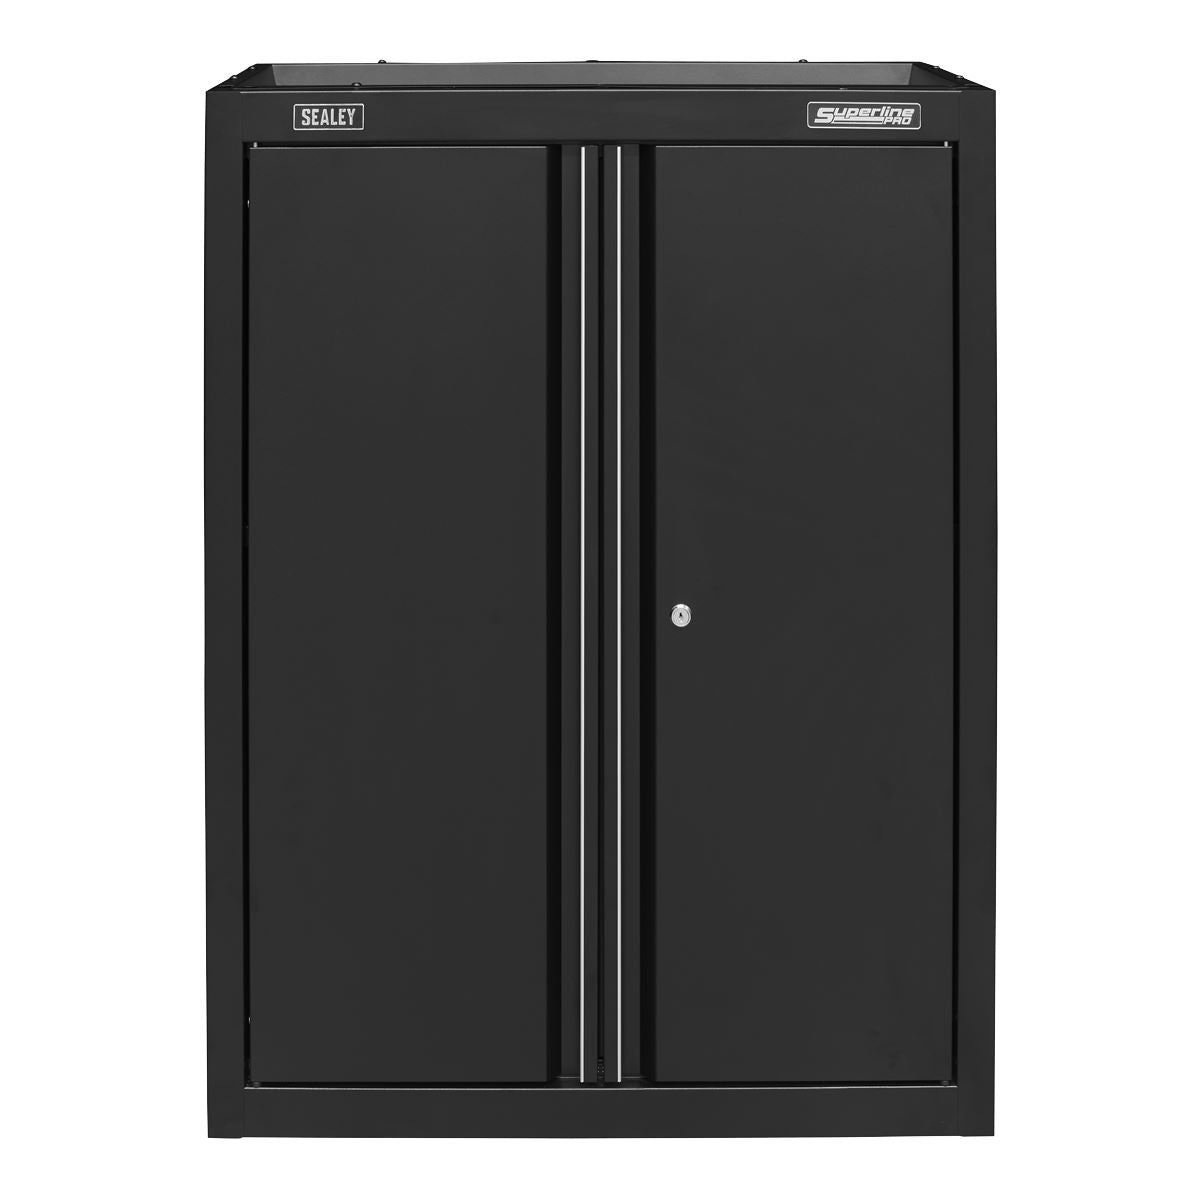 Sealey Superline Pro Rapid-Fit Dual Stacking Cabinets